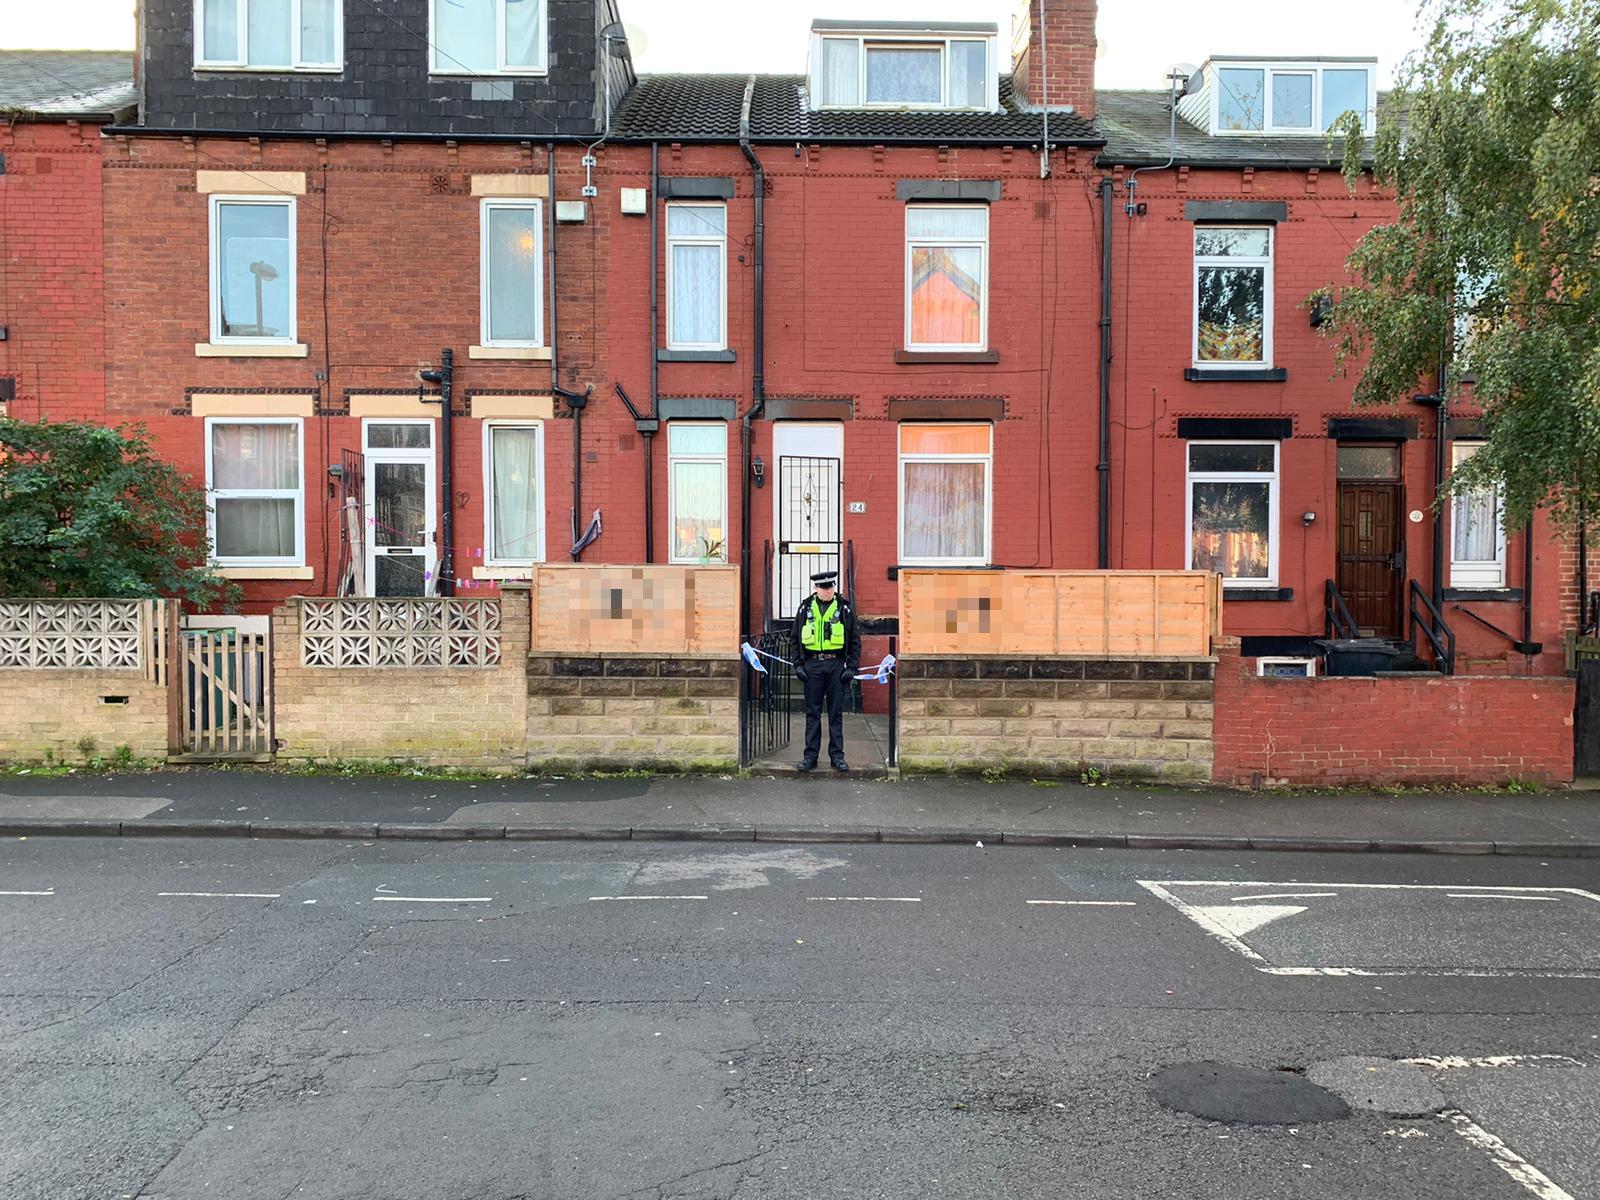 Police outside a house in Harehills after a substance was thrown during a burglary early on Thursday morning